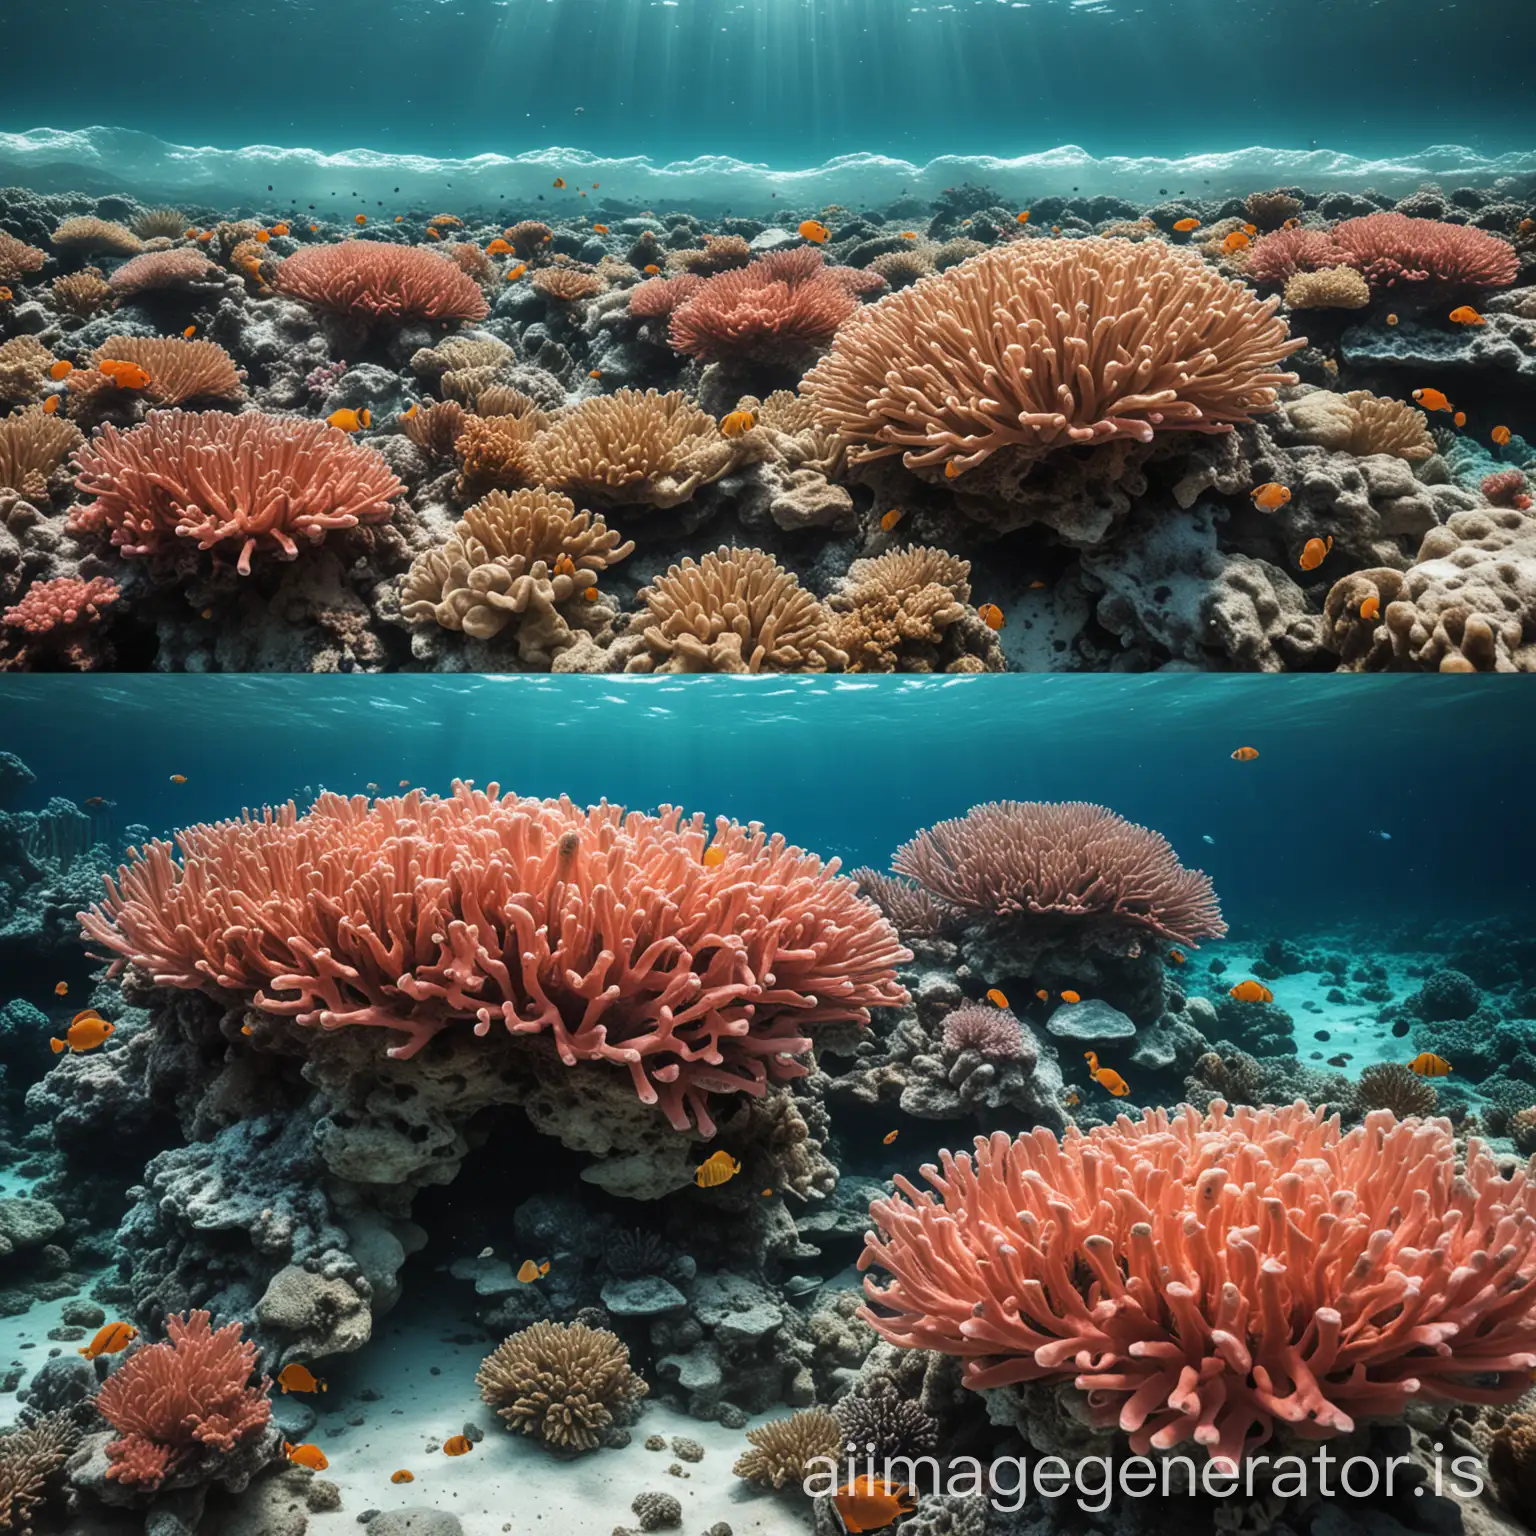 Create 4 surreal, conceptual images comparing Airbnb's business model to coral reef ecosystems. Use a vibrant color palette blending ocean blues with Airbnb's brand colors.nnImage 1 (Similarities):nnDiversity: Split scene - half coral reef, half city skyline. Various coral species morph into different Airbnb accommodations.nInterconnectedness: Fish swimming between coral/buildings, representing guests moving between listings.nAdaptation: Coral polyps extending and retracting, mirroring Airbnb's pricing algorithm adjusting to demand.nnImage 2 (Differences):nnOrigin: Left side shows natural coral growth; right side displays a digital interface 'growing' Airbnb listings.nResource Use: Coral feeding on organic matter vs. Airbnb profiting from digital transactions.nLifespan: Ancient coral formations juxtaposed with modern, rapidly changing cityscapes.nnImage 3 (Similarity):nSymbiosis: Clownfish in anemone morphing into guests in Airbnb homes, with mutual benefits highlighted.nnImage 4 (Difference):nRegulation: Natural reef self-regulation vs. Airbnb's algorithmic control and human moderation.nnBlend organic and digital elements in each image for a thought-provoking, visually striking result.